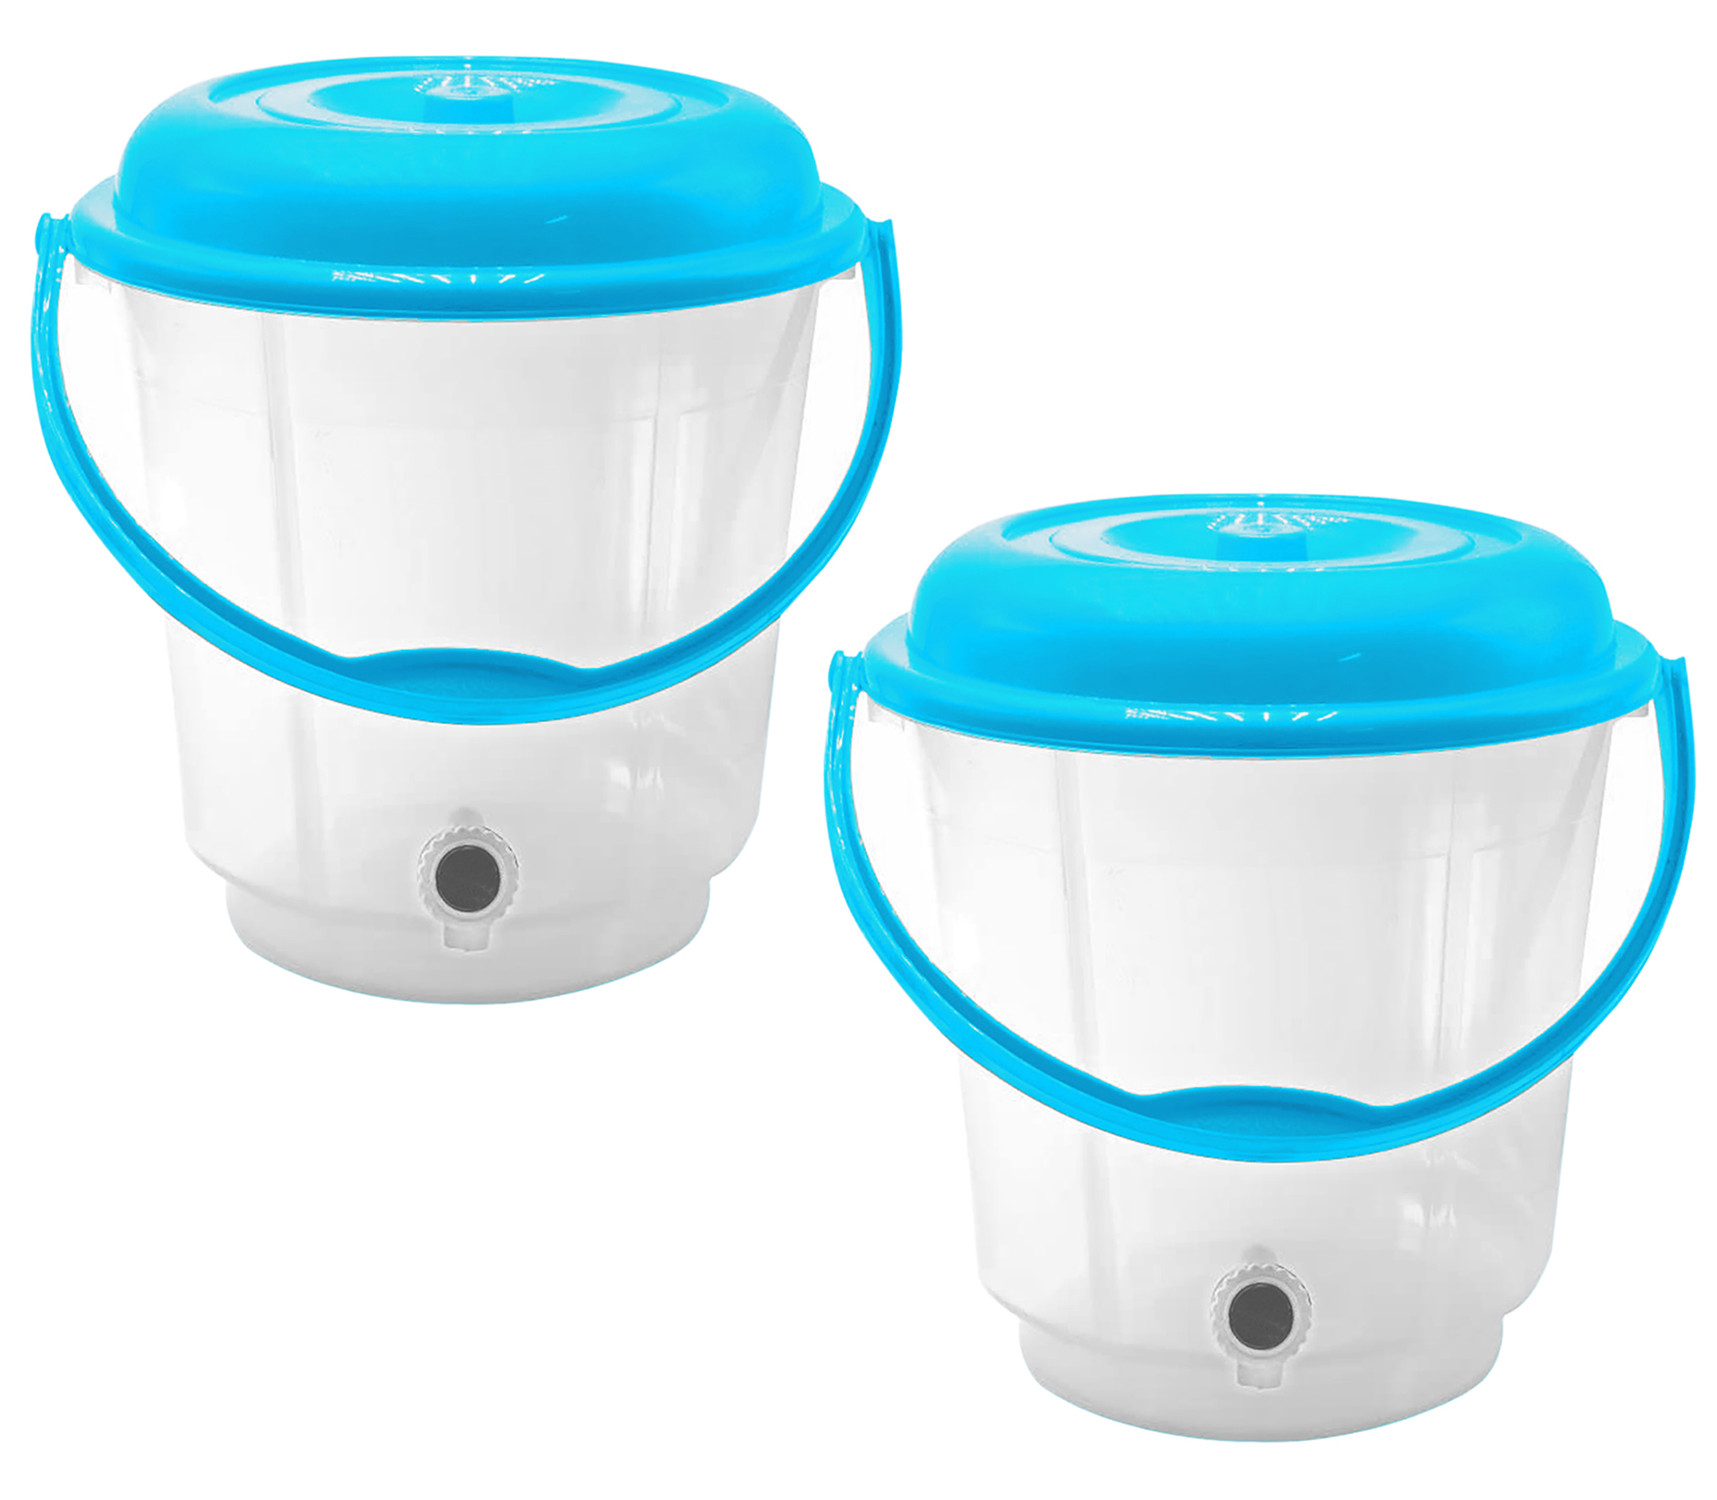 Kuber Industries Multipurposes Plastic Transparent Bucket With Lid & Tap System For Home Cleaning & Save Water, 18Ltr. (Blue)